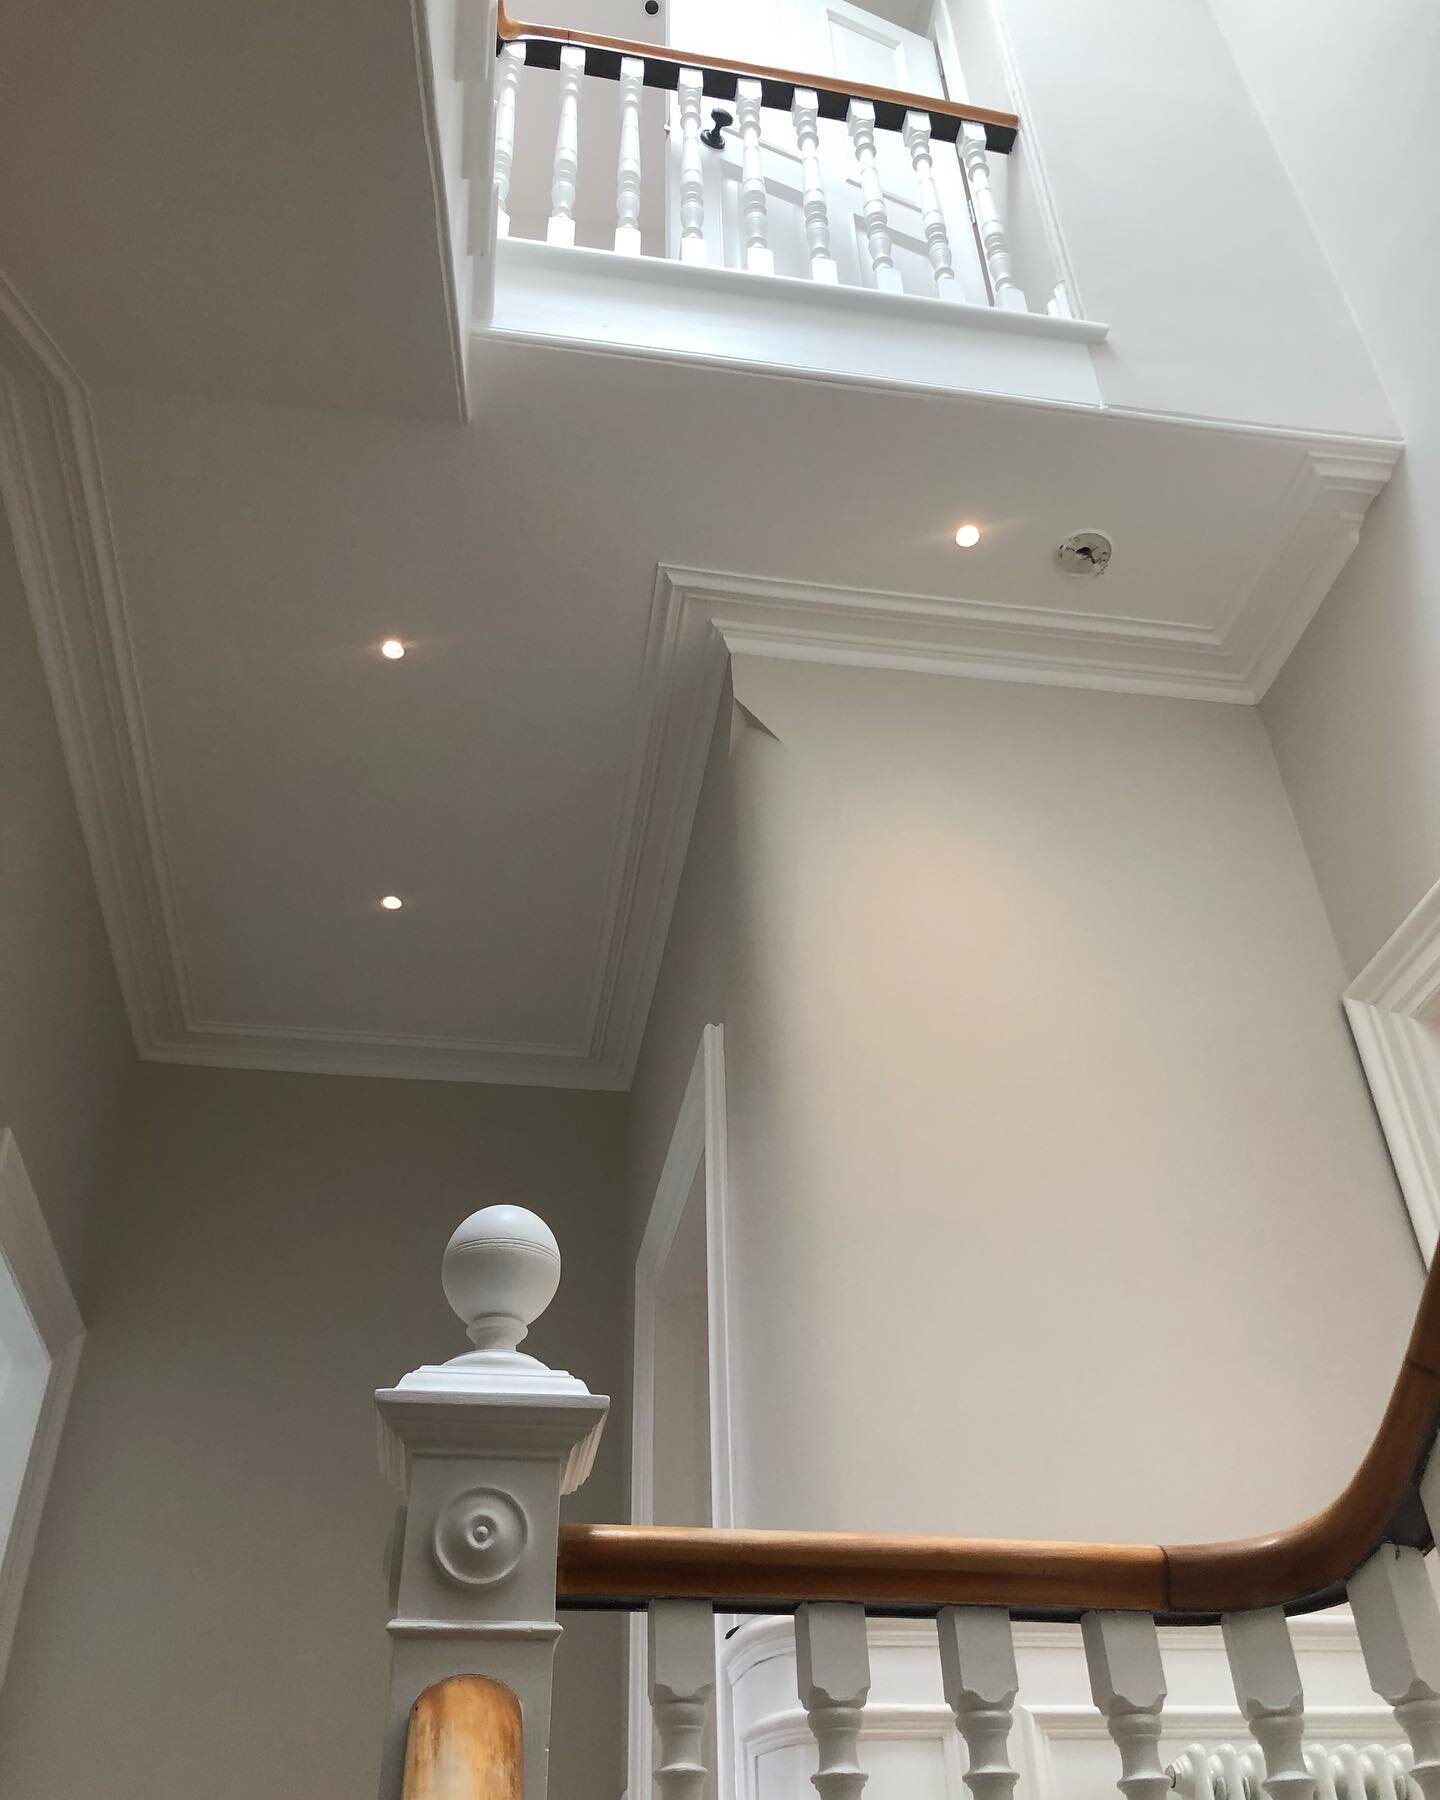 The stairwell is now flooded with light from the new roof light, highlighting the original period details. Nearly complete, just one or two bits to finish.
.
.
.

#architect #architecture #designer #aberdeenshire #contemporarydesign #contemporaryhome